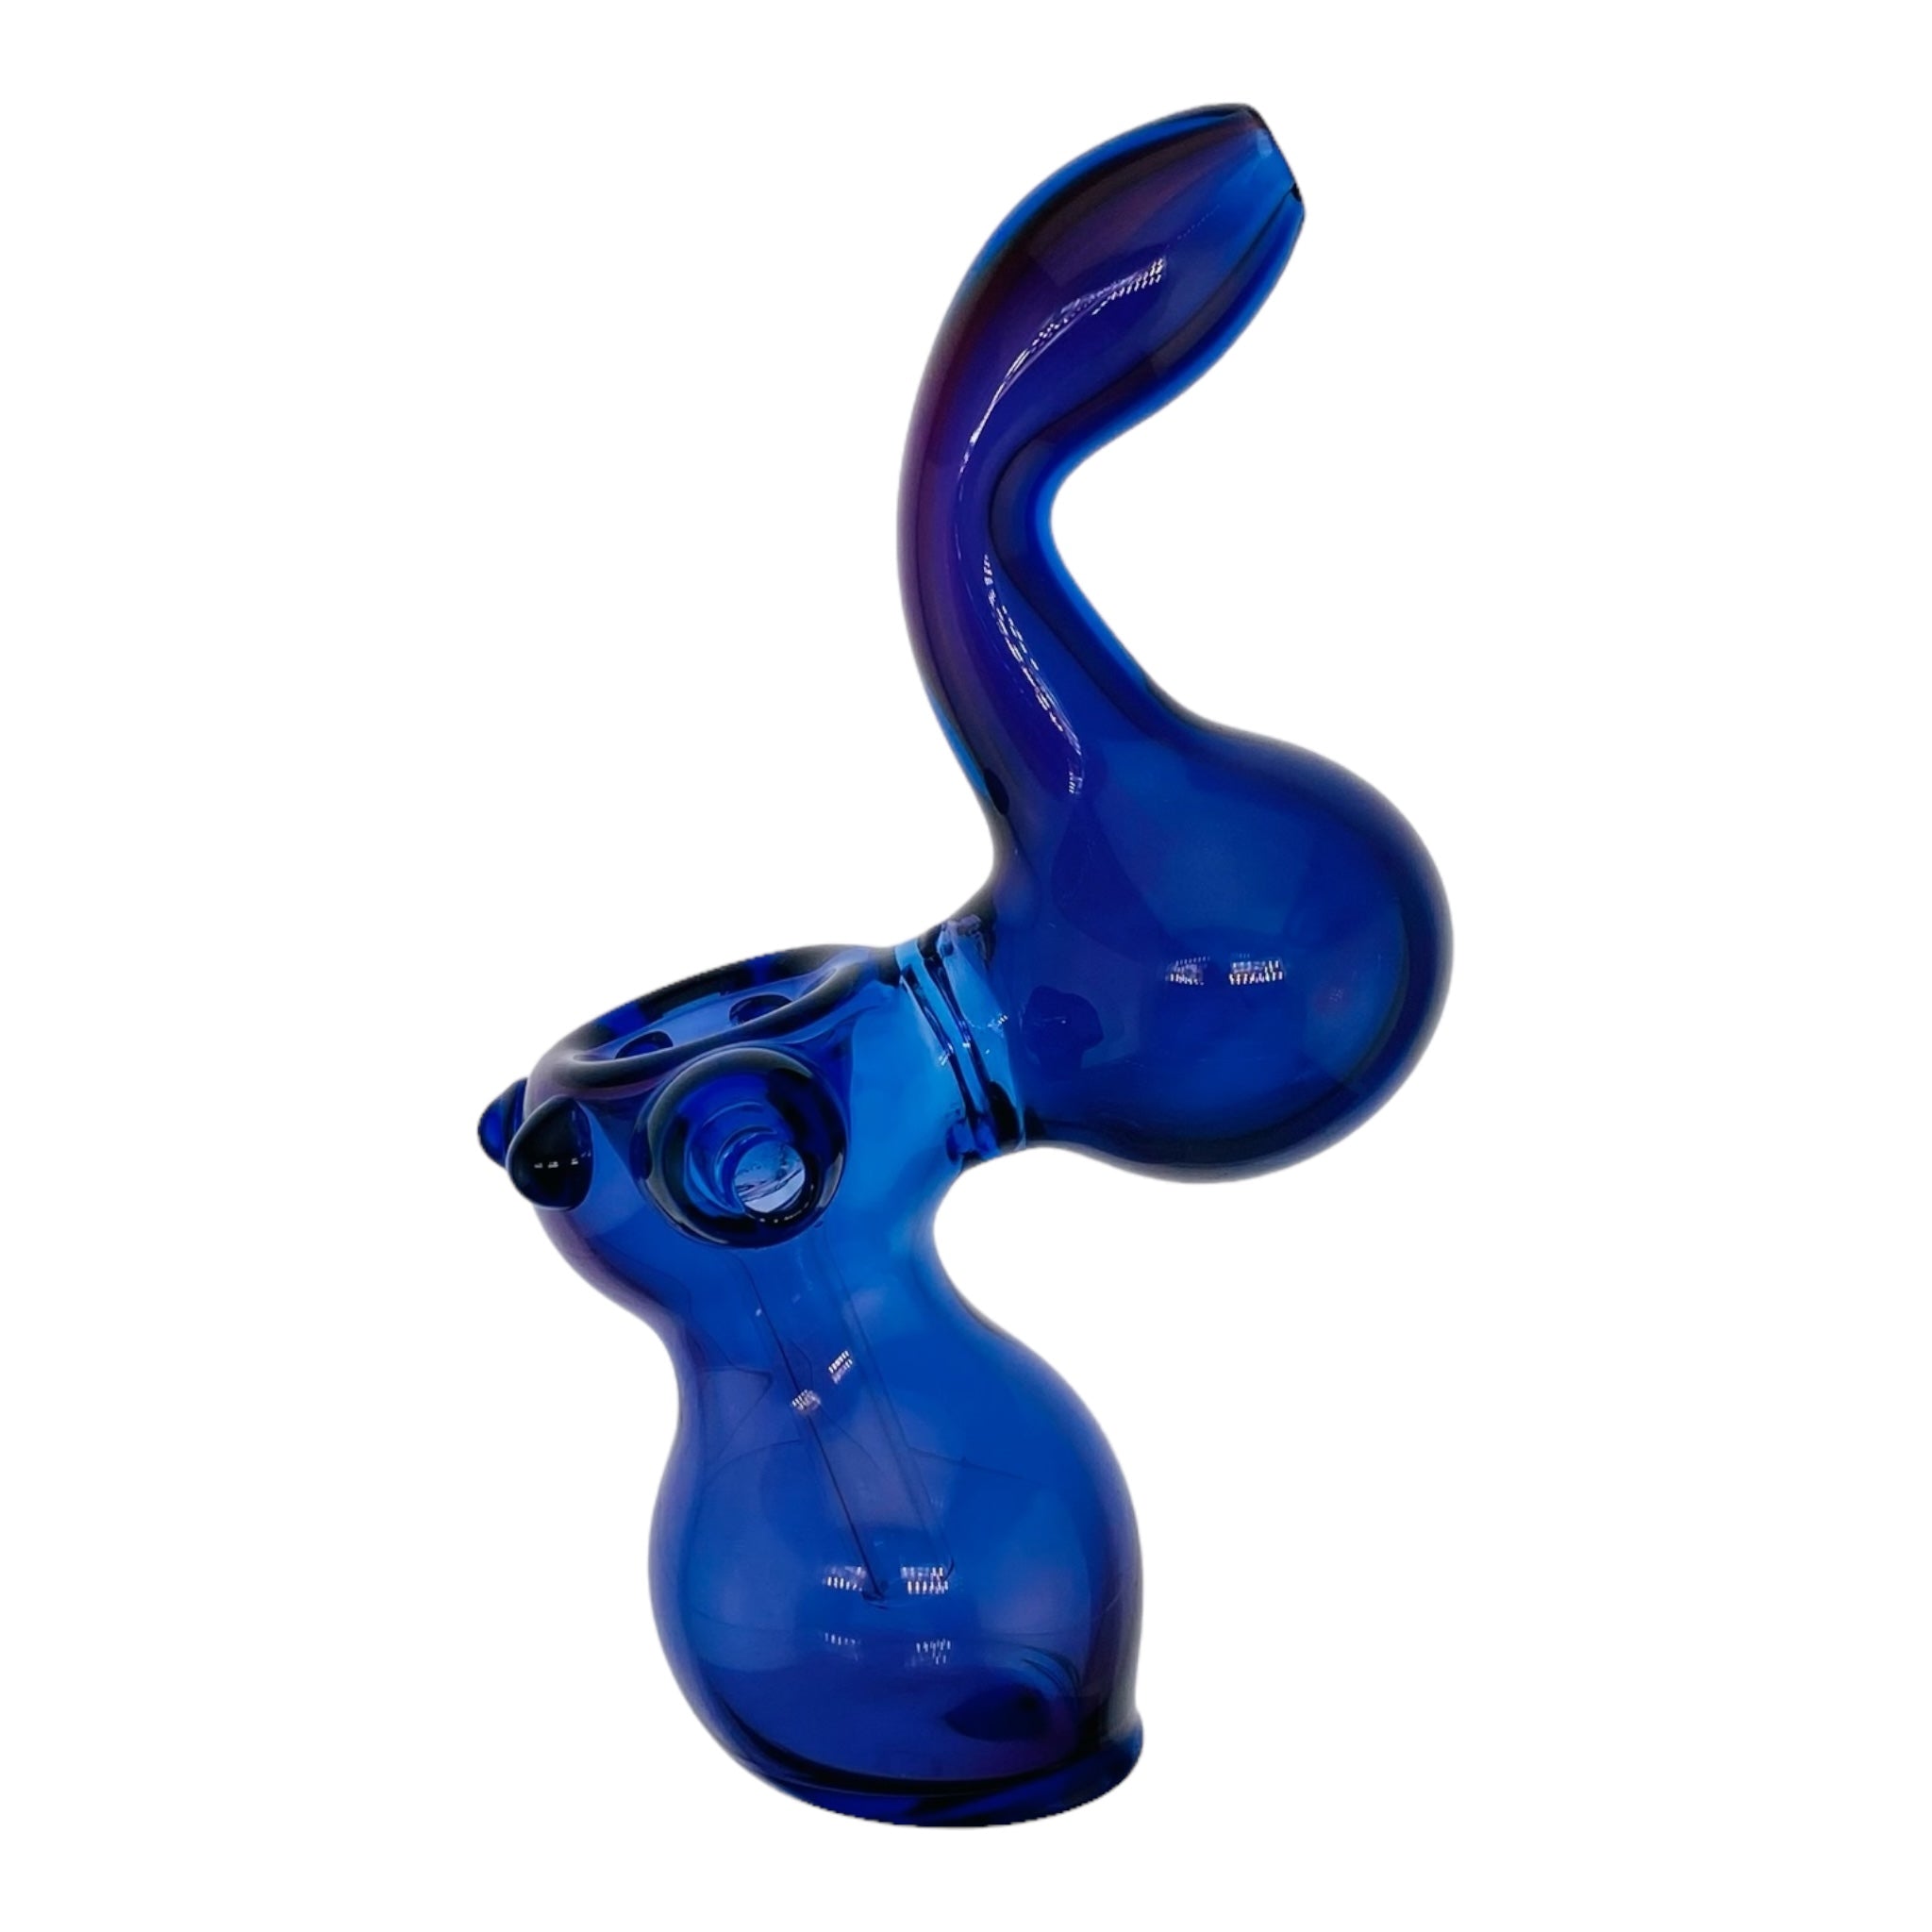 Cobalt Blue Stand Up Glass Bubbler Water Pipe for weed or tobacco for sale free shipping